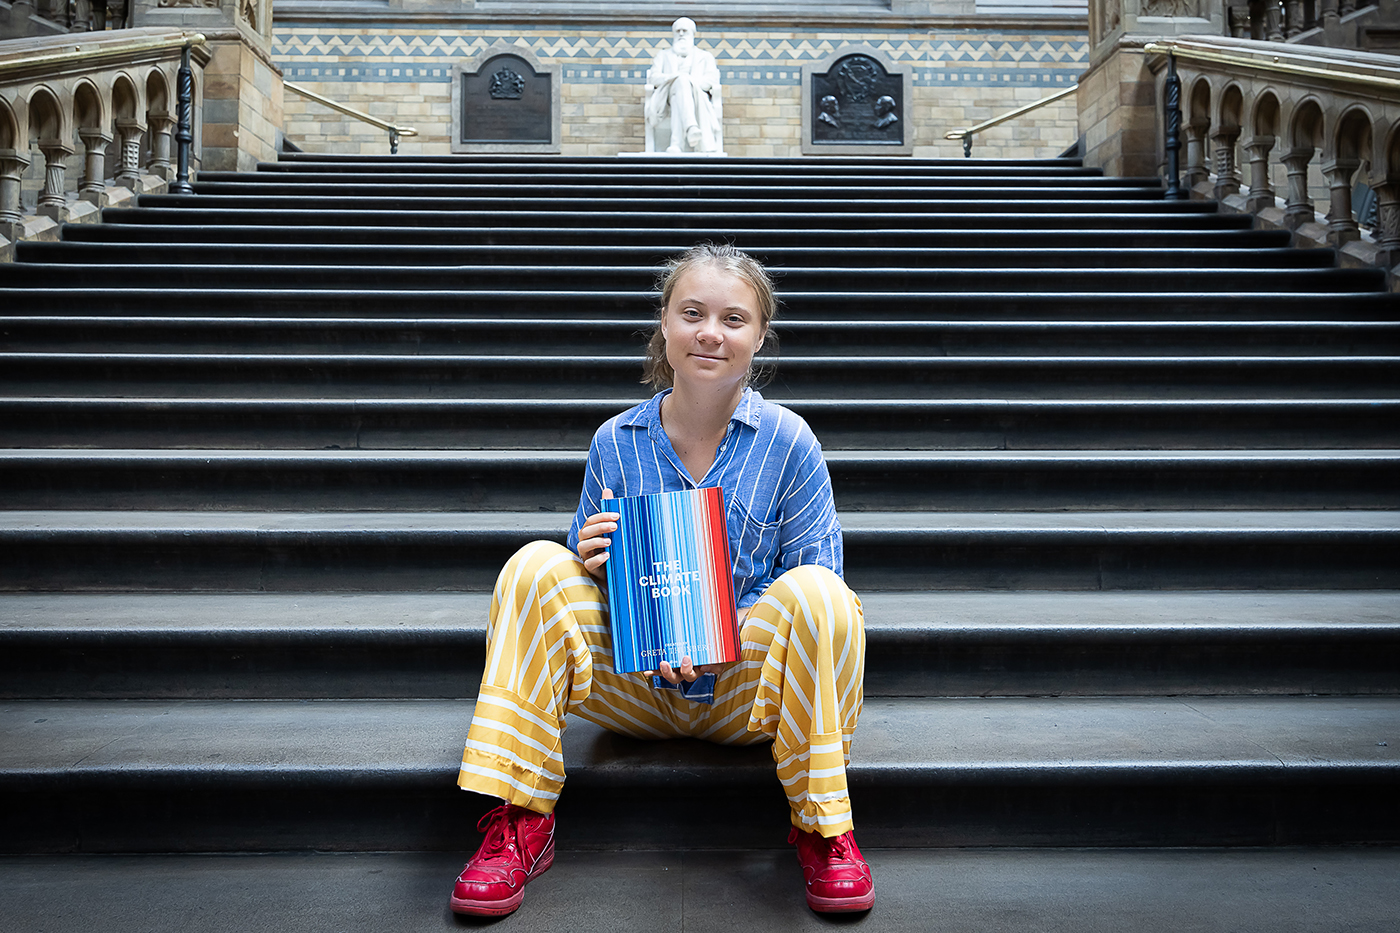 Climate activist Greta Thunberg sits for a photo on steps